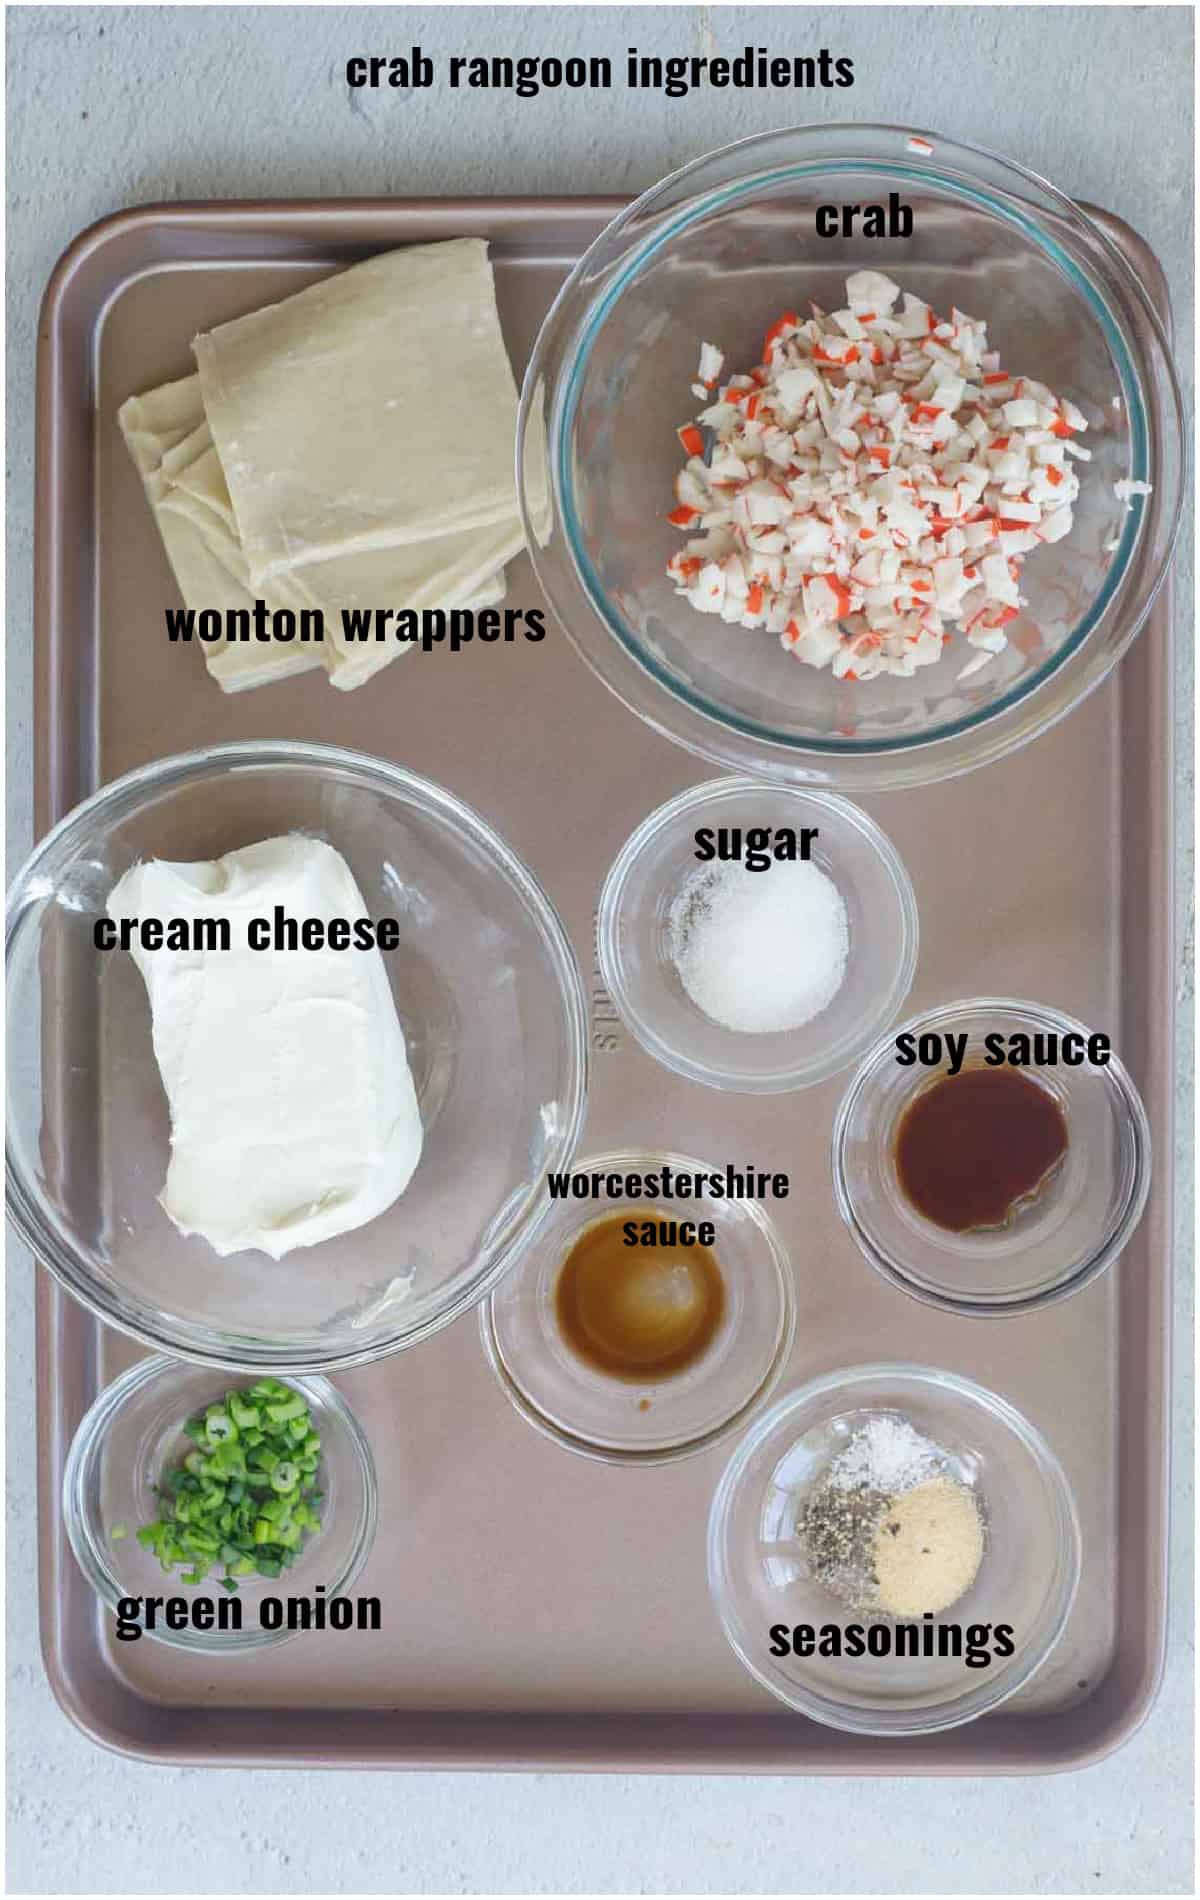 The ingredients for this easy crab rangoon recipe.